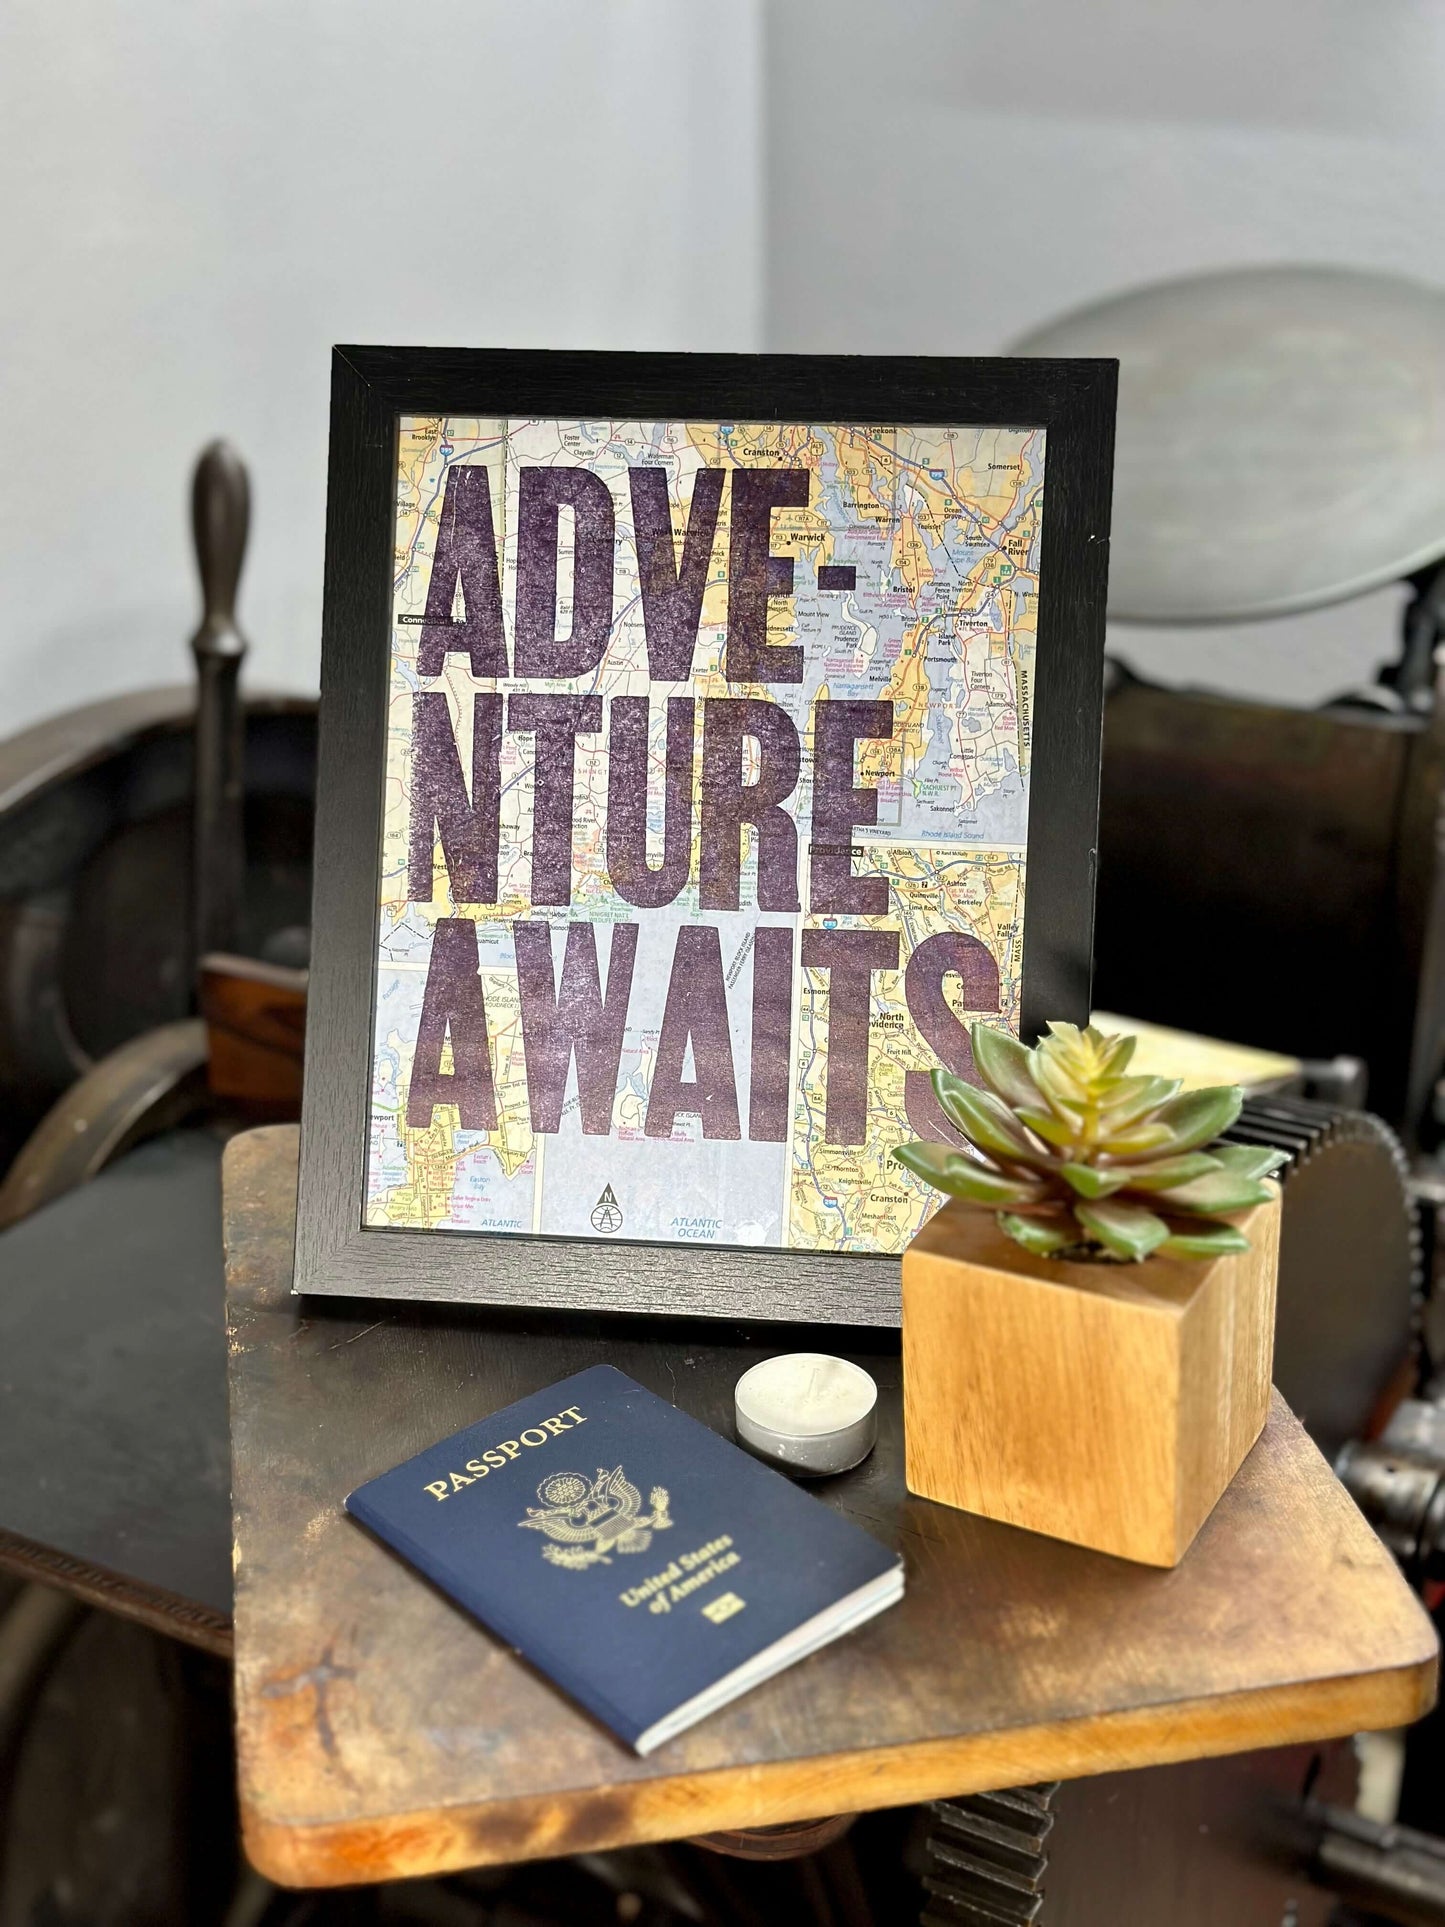 Adventure Awaits - 8x10 Letterpress print on road map displayed with passport